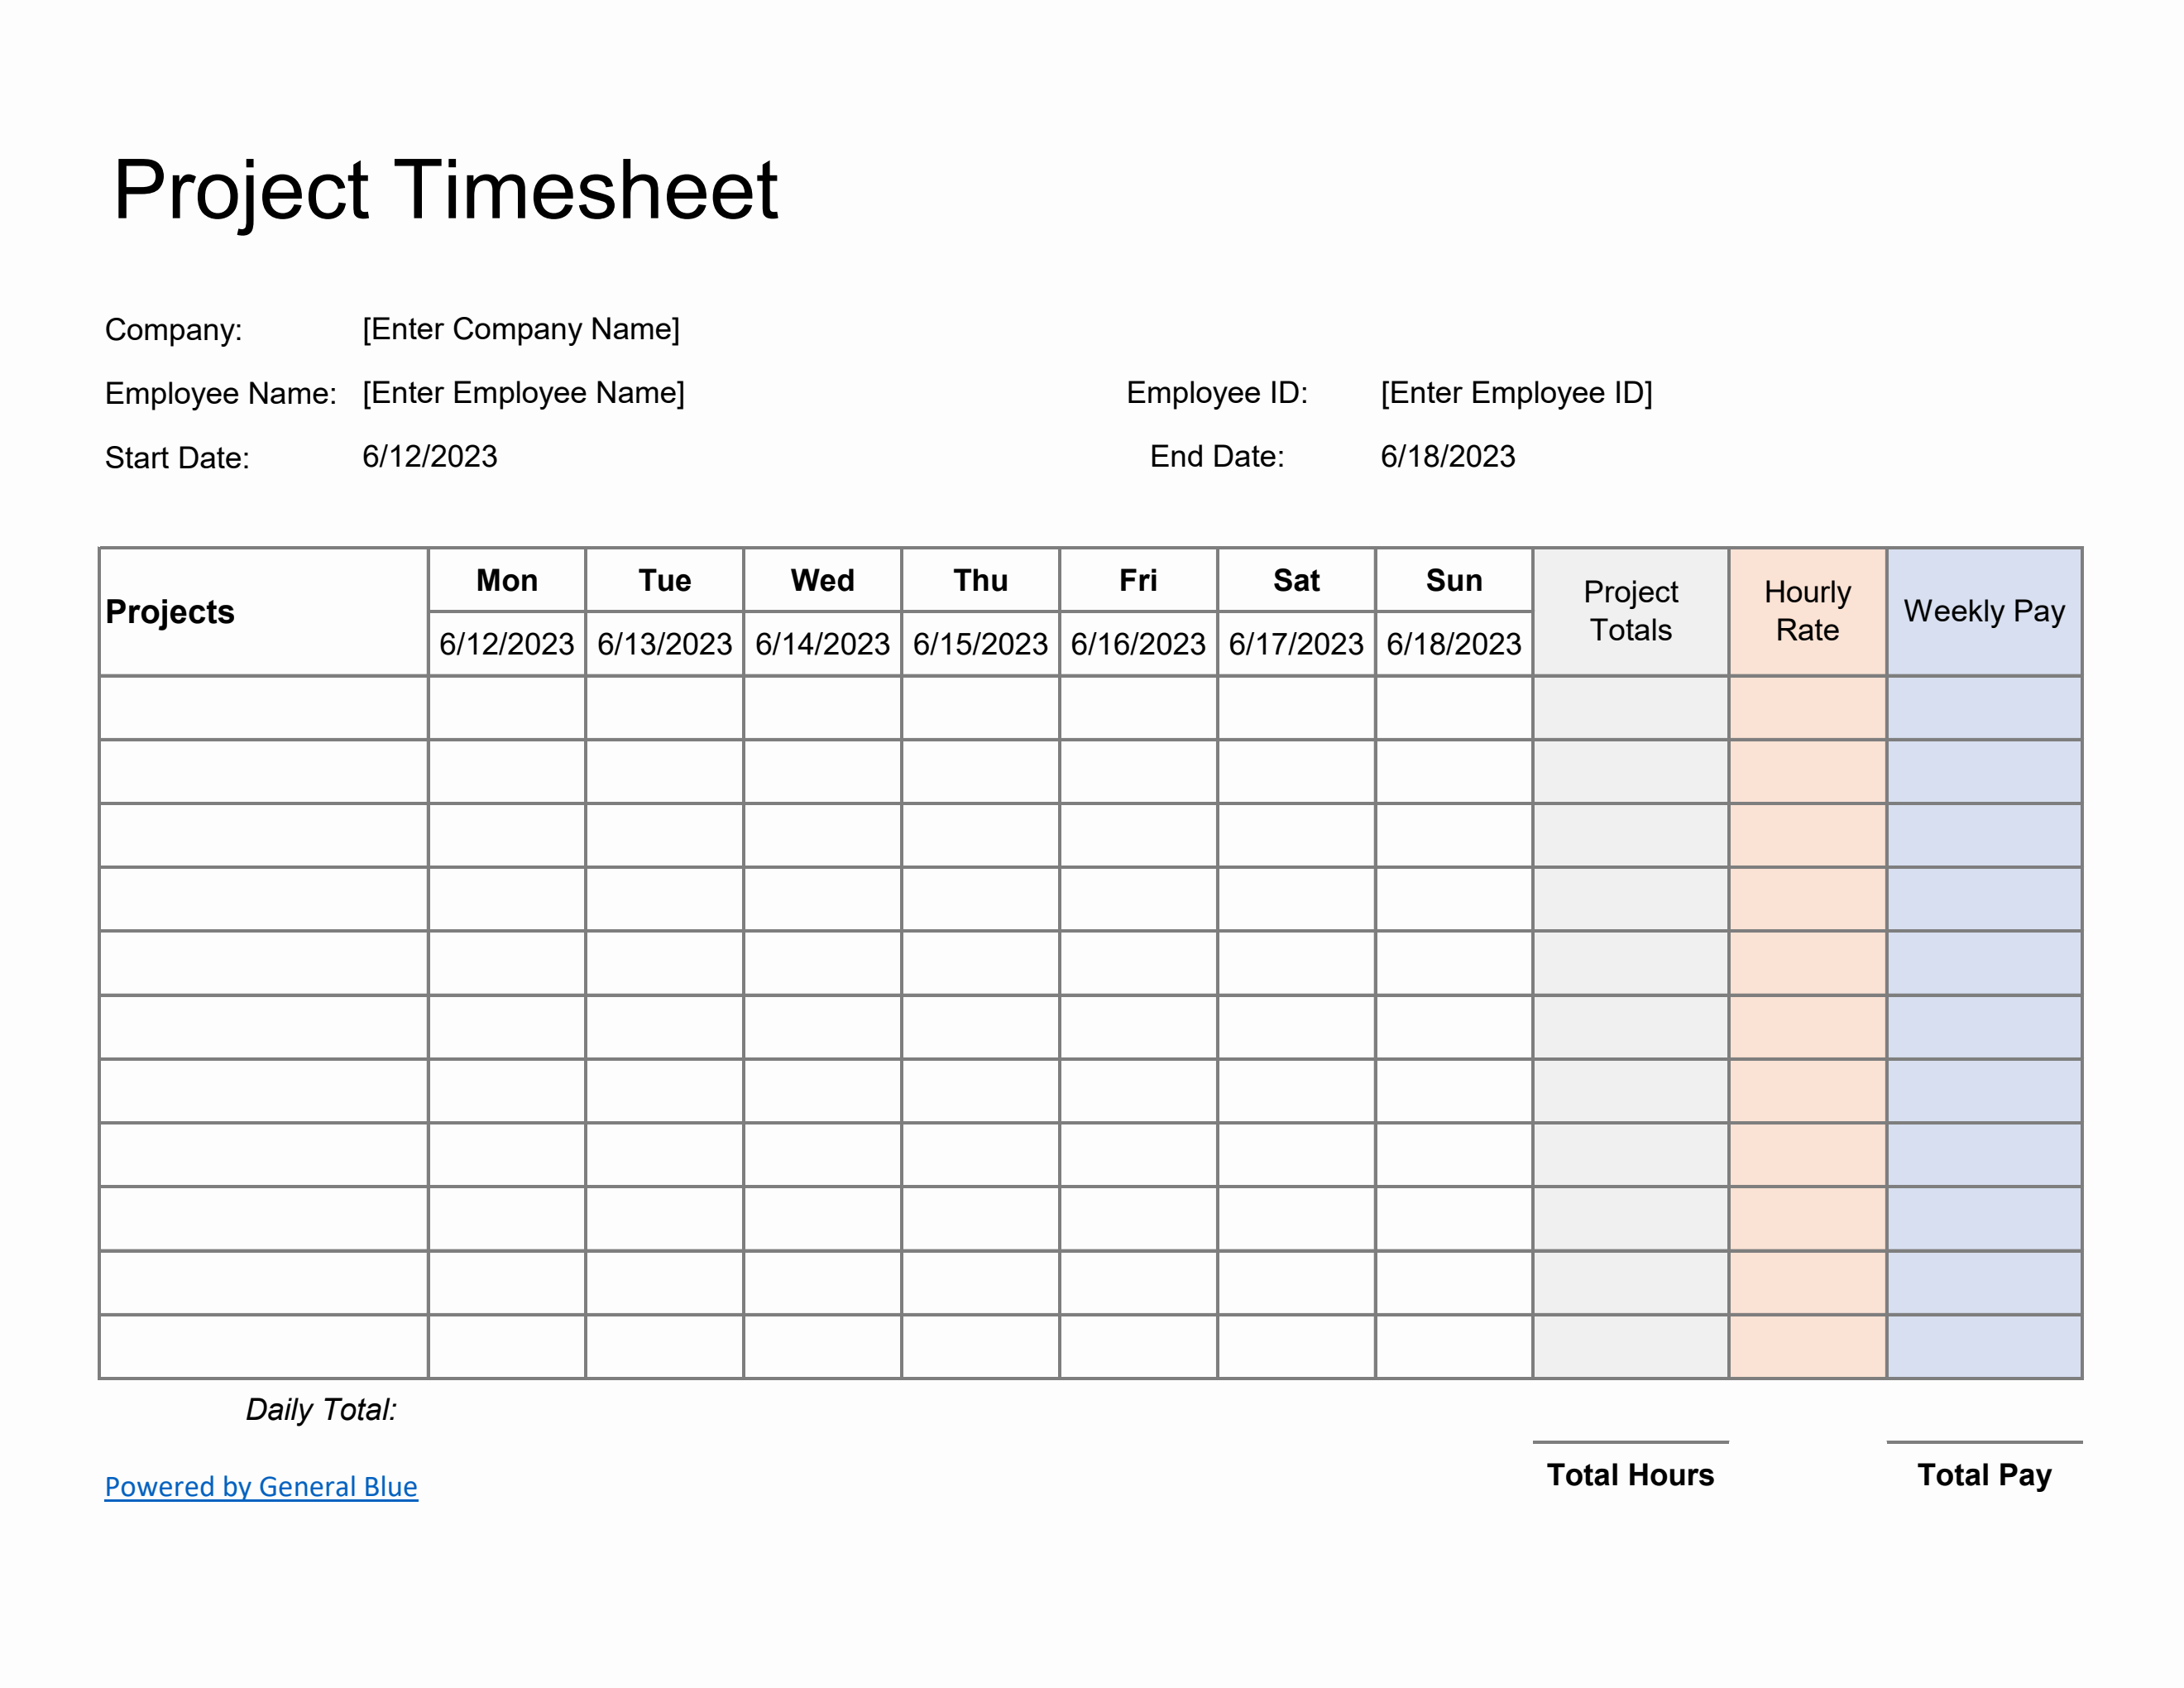 weekly timesheet template excel free download